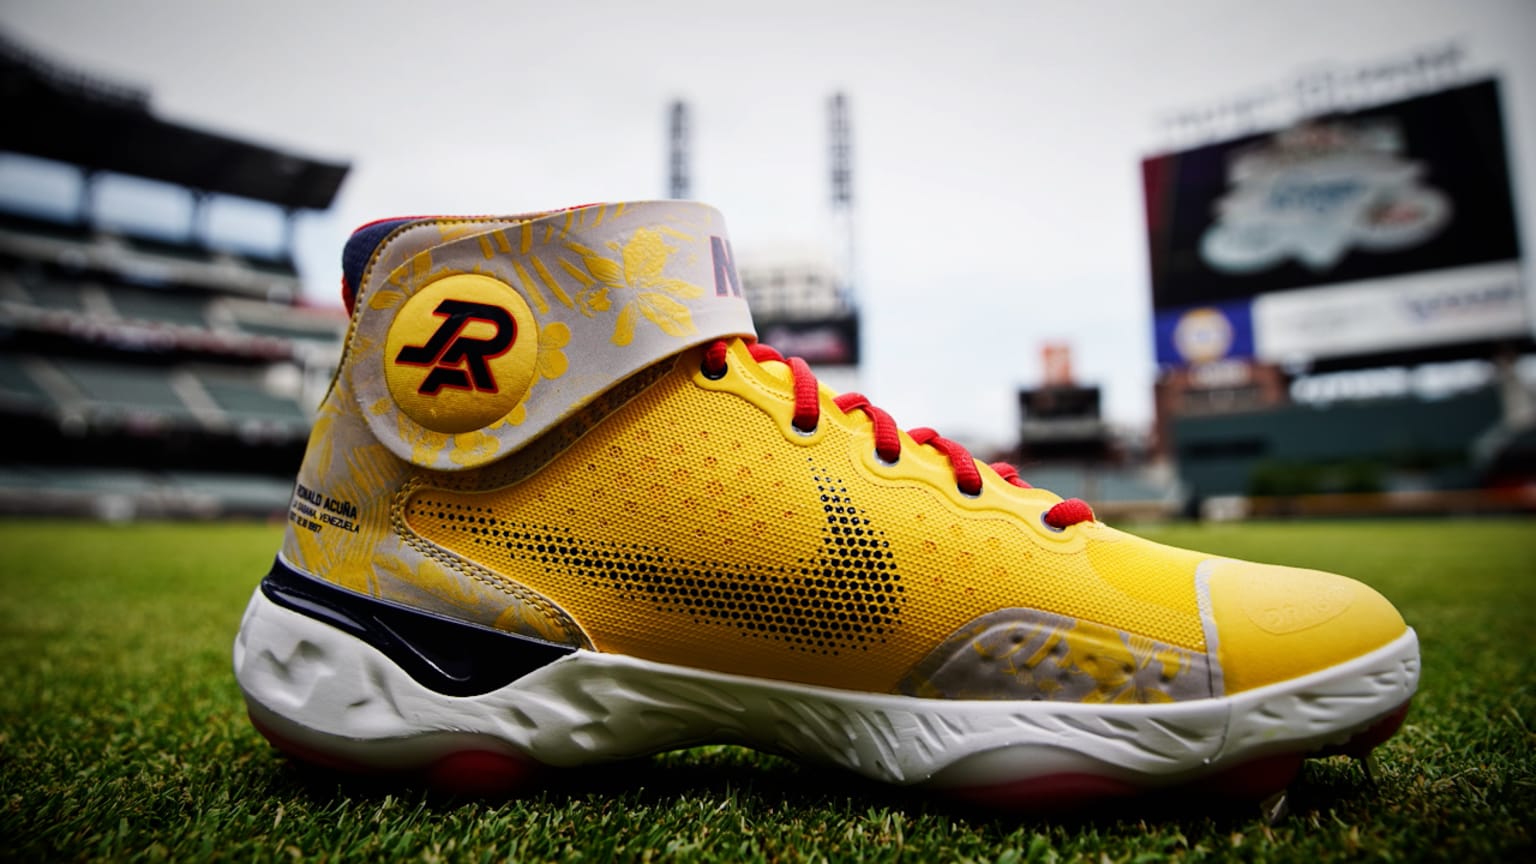 Acuna yellow cleats